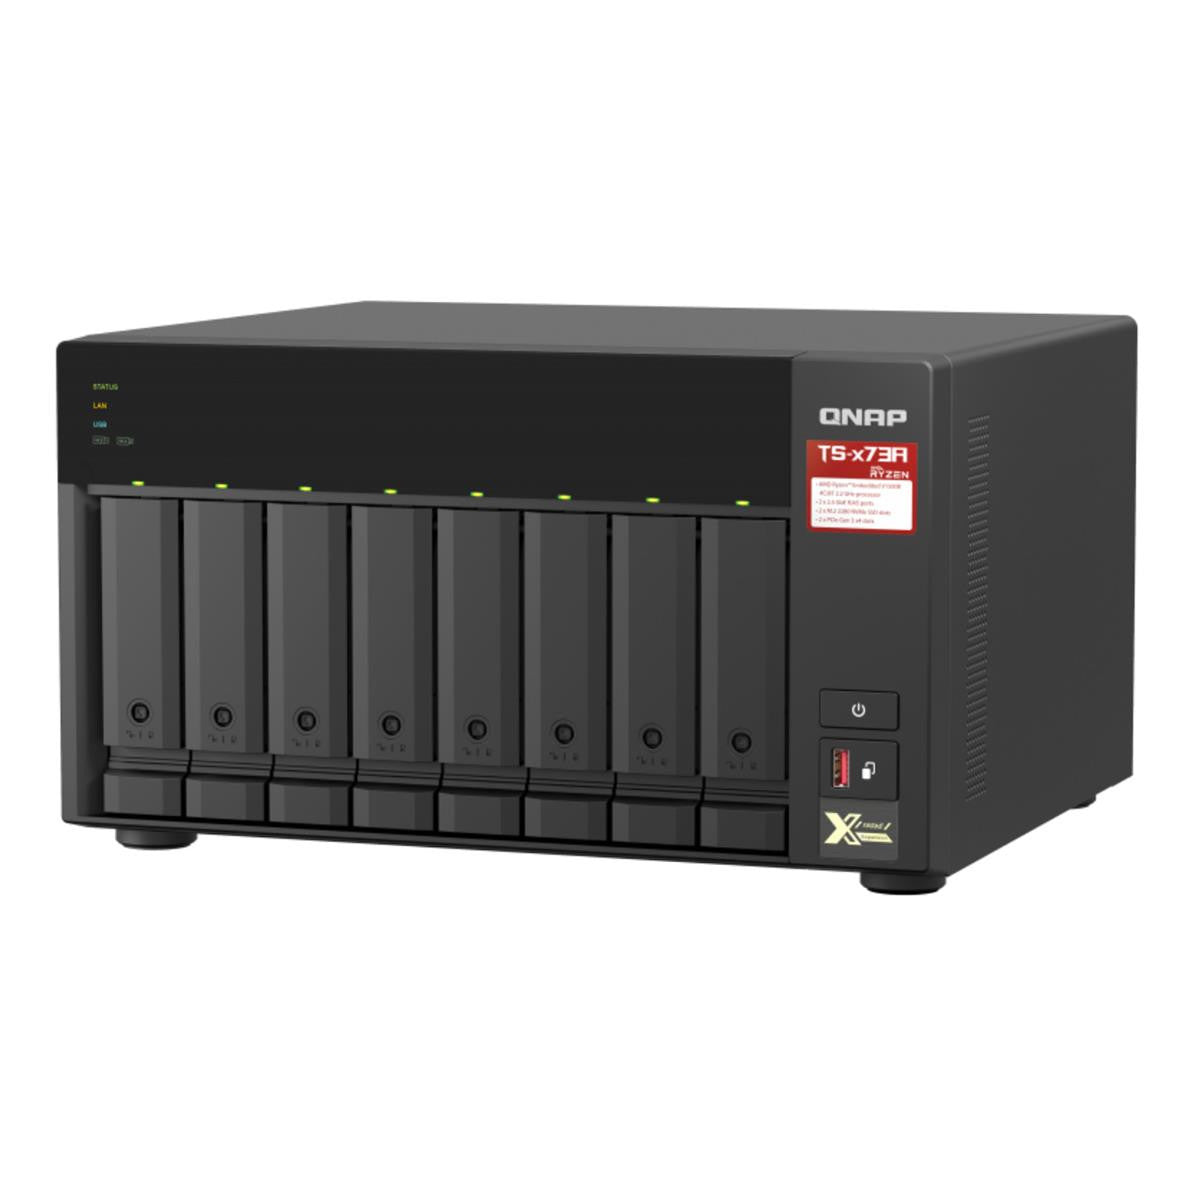 QNAP TS-873A 8-BAY NAS with 8GB DDR4 RAM and 32TB (8x4TB) Western Digital RED PLUS Drives Fully Assembled and Tested